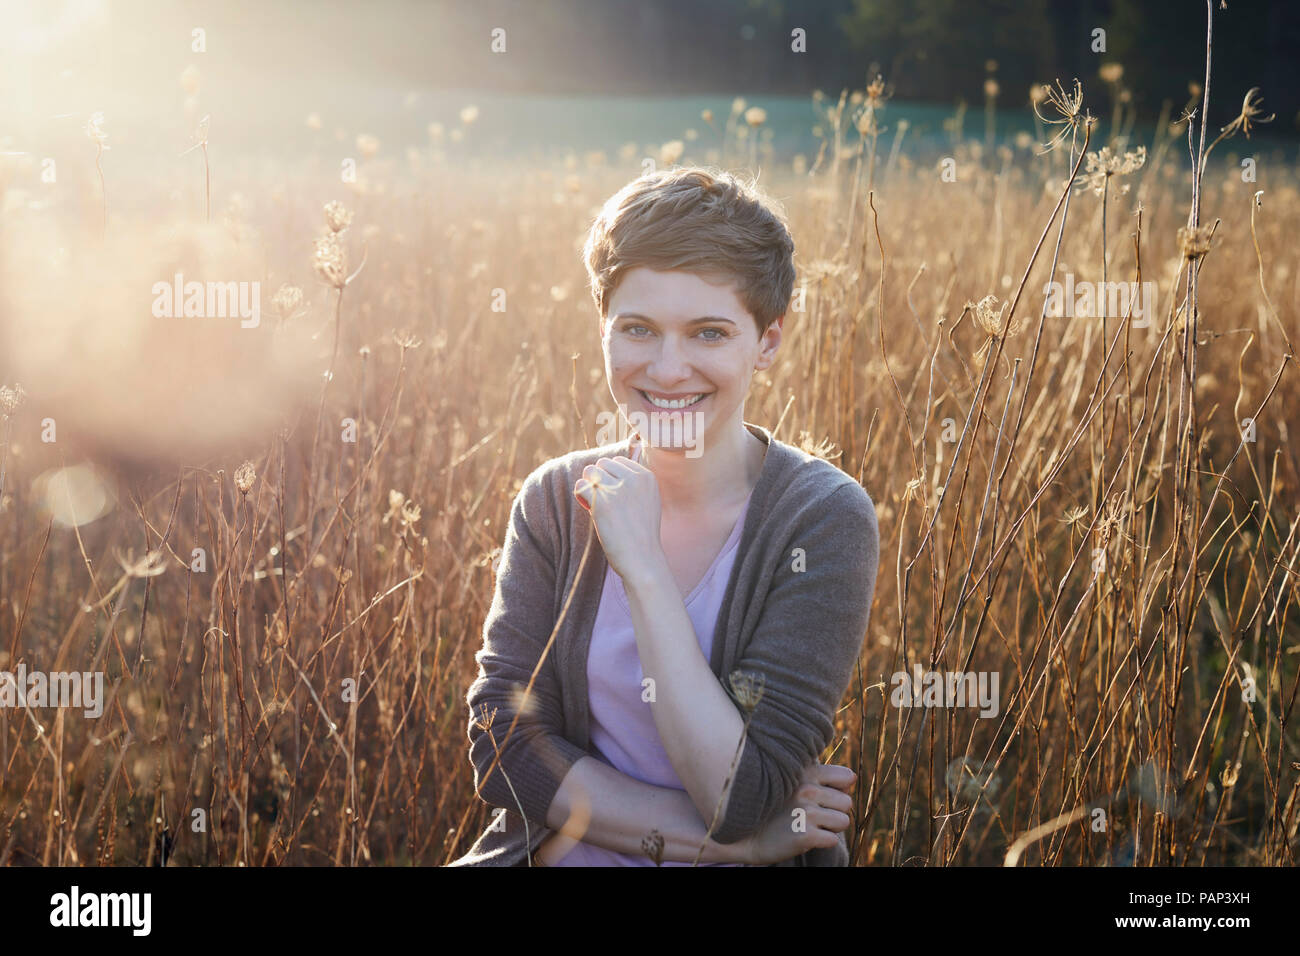 Portrait of smiling woman relaxing in nature Banque D'Images